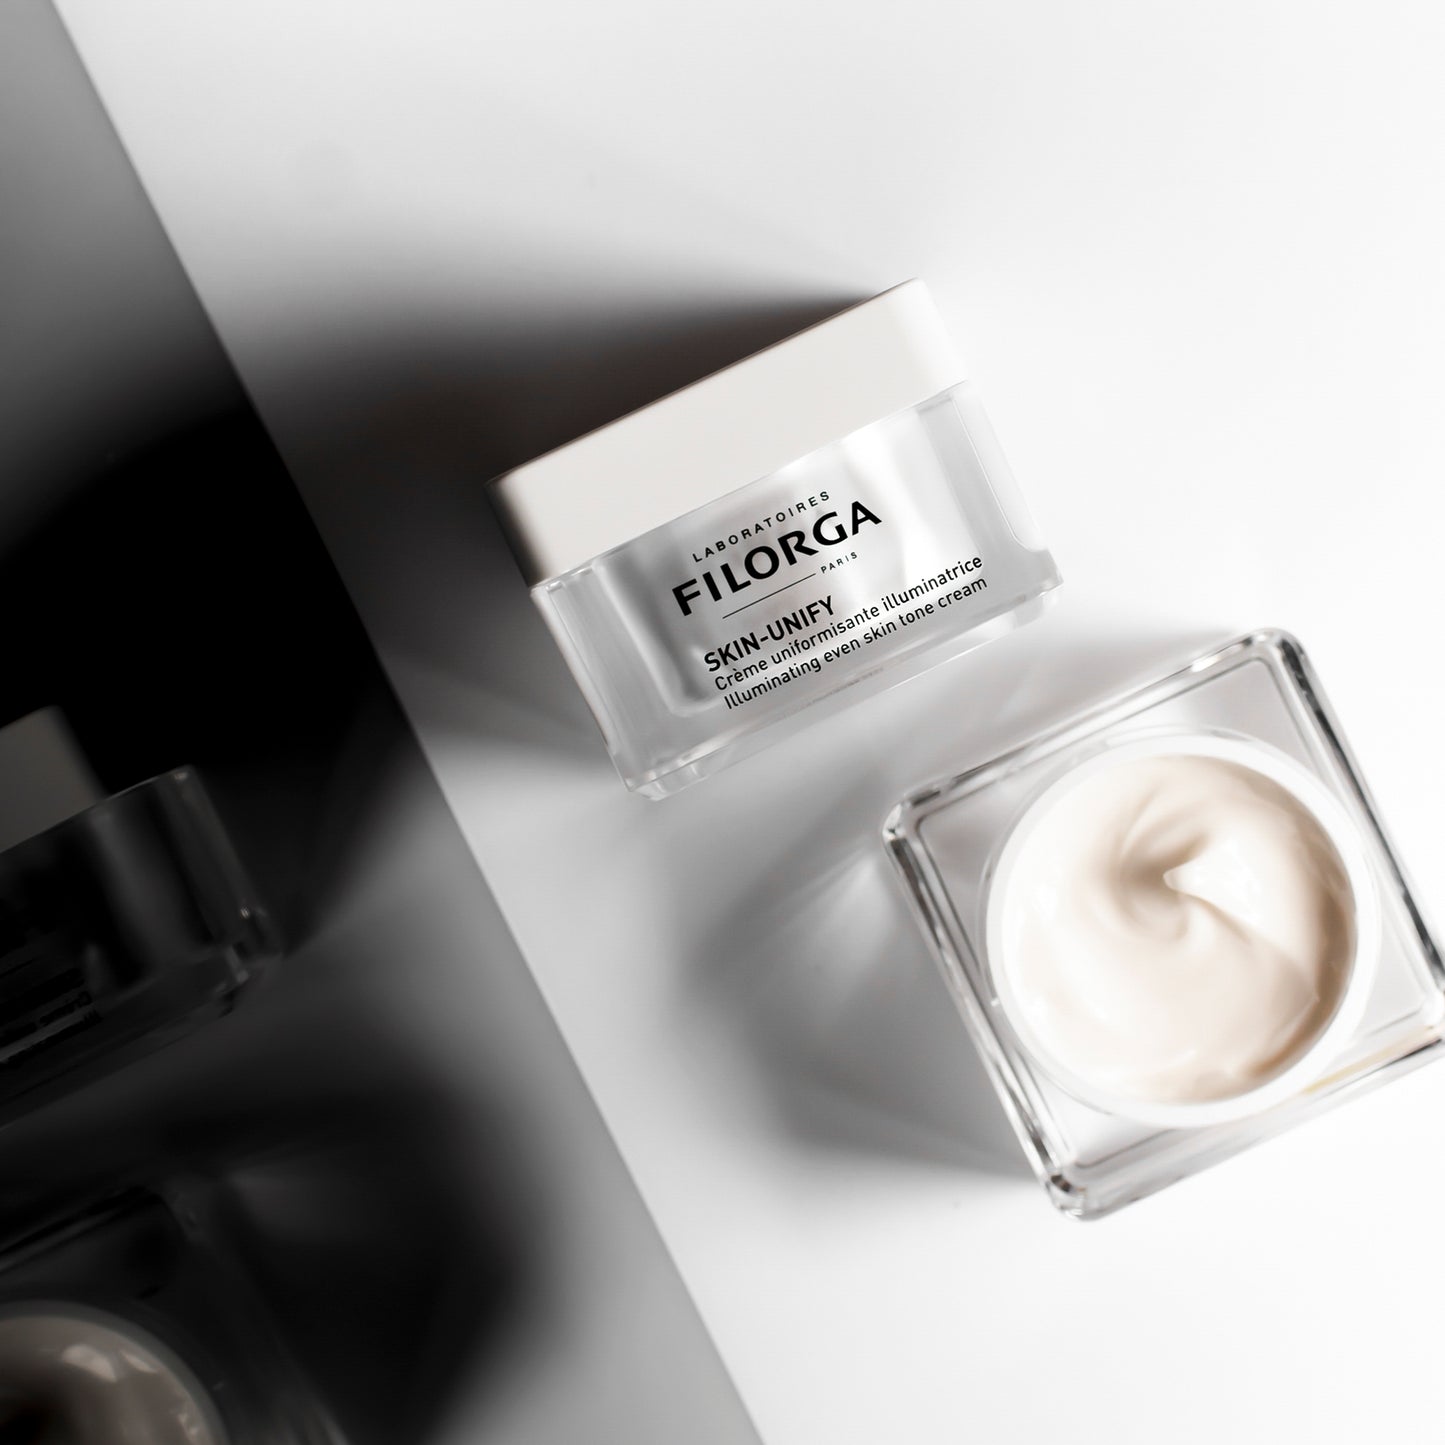 Closed jar on its side and open jar face up showing FILORGA SKIN-UNIFY cream